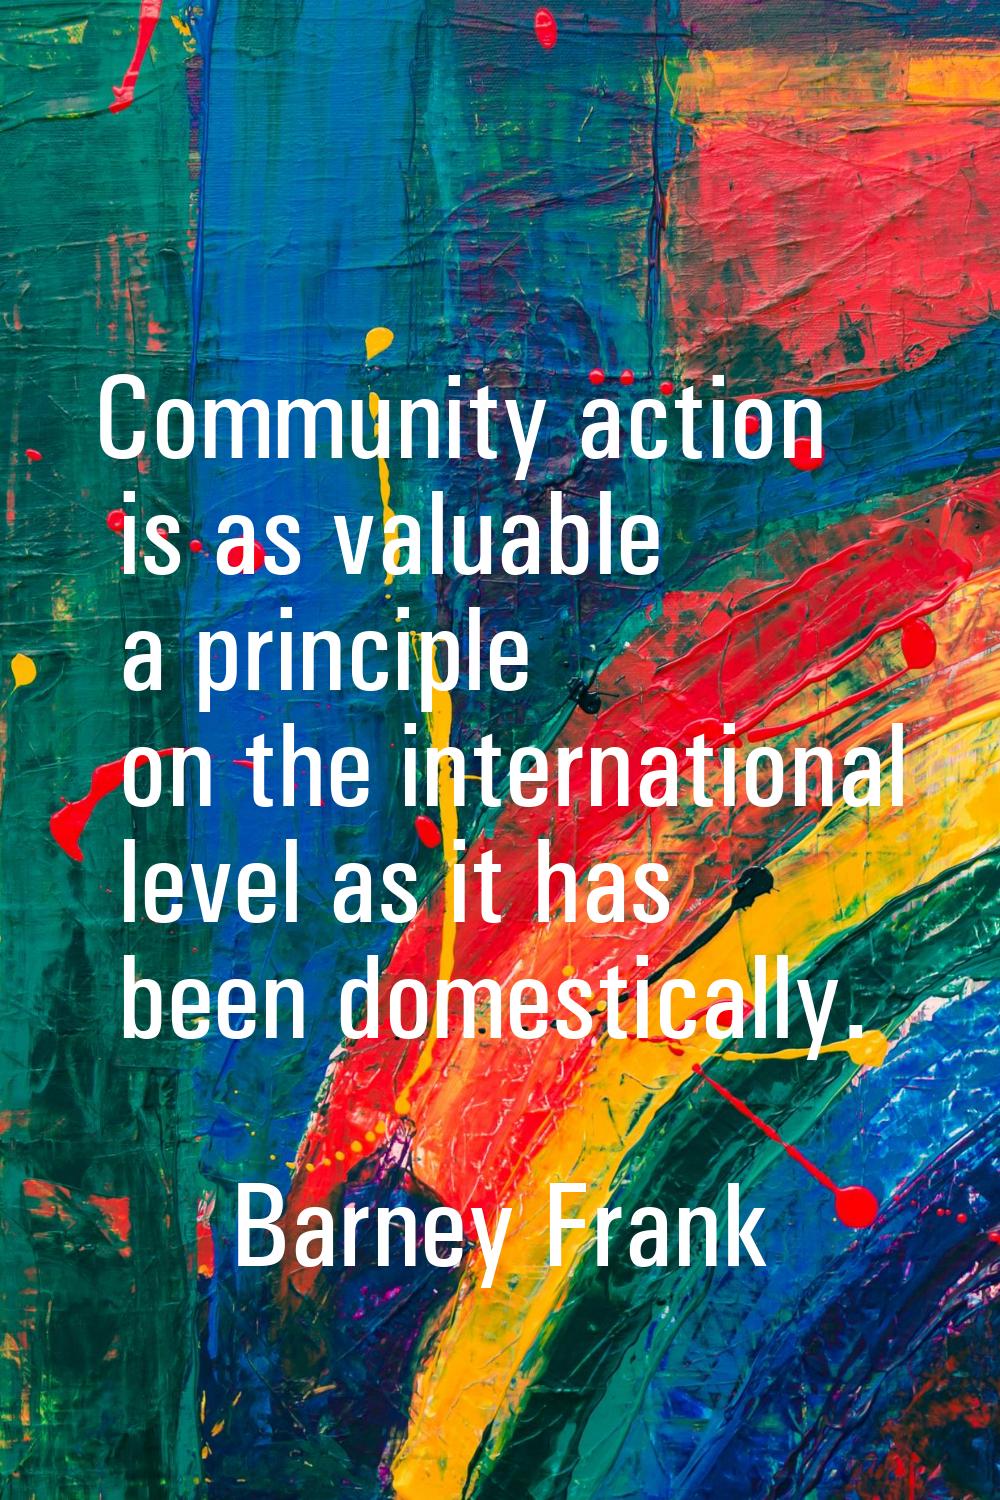 Community action is as valuable a principle on the international level as it has been domestically.